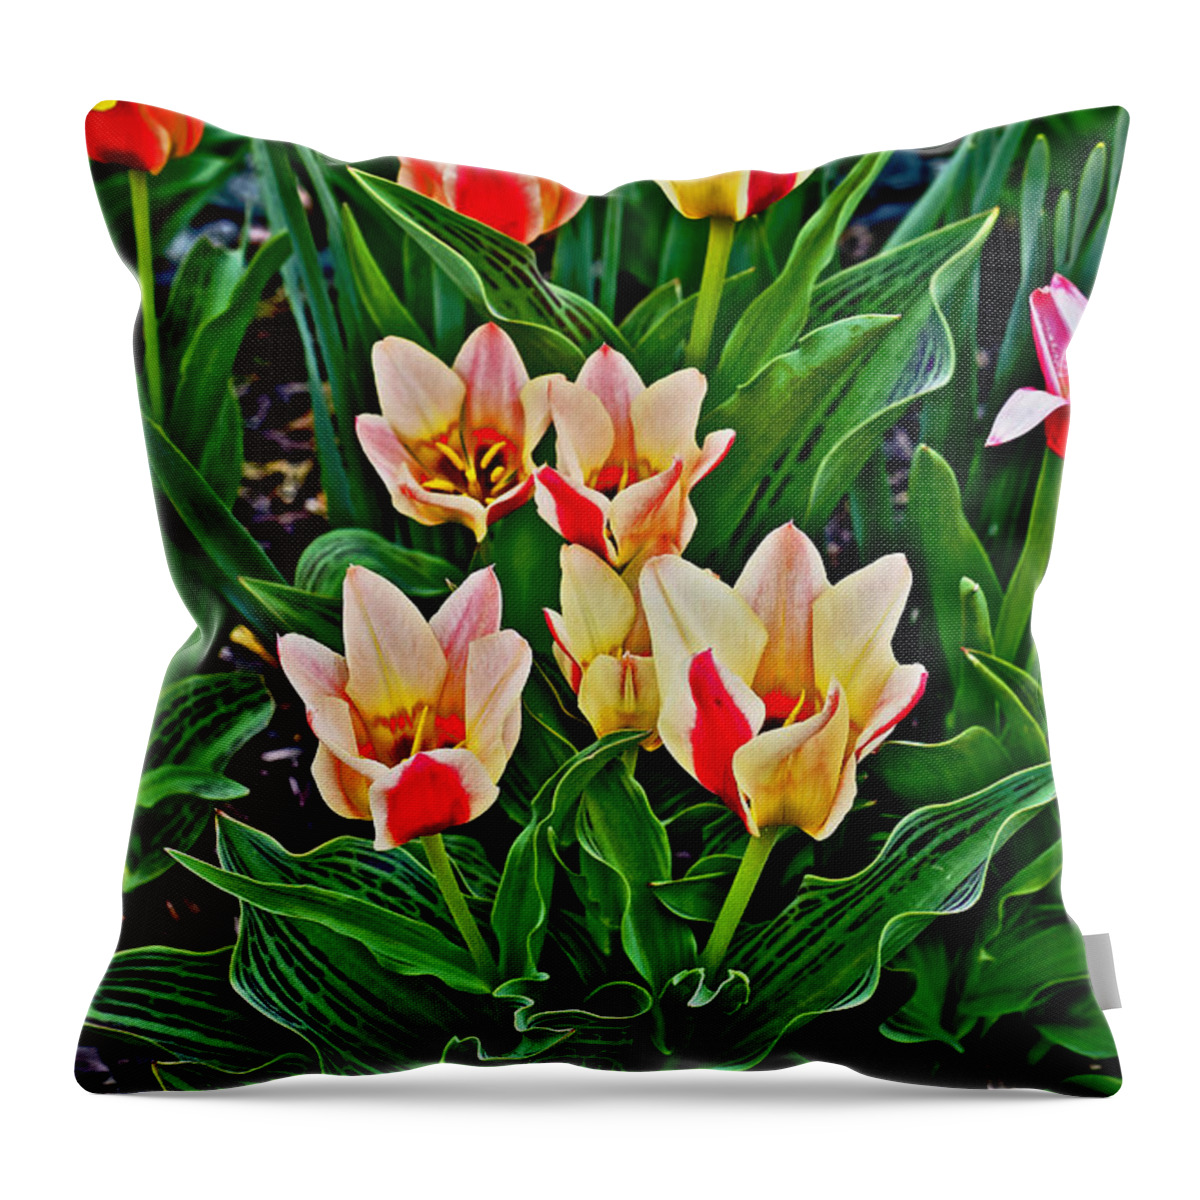 Tulips Throw Pillow featuring the photograph 2016 Acewood Tulips 6 by Janis Senungetuk